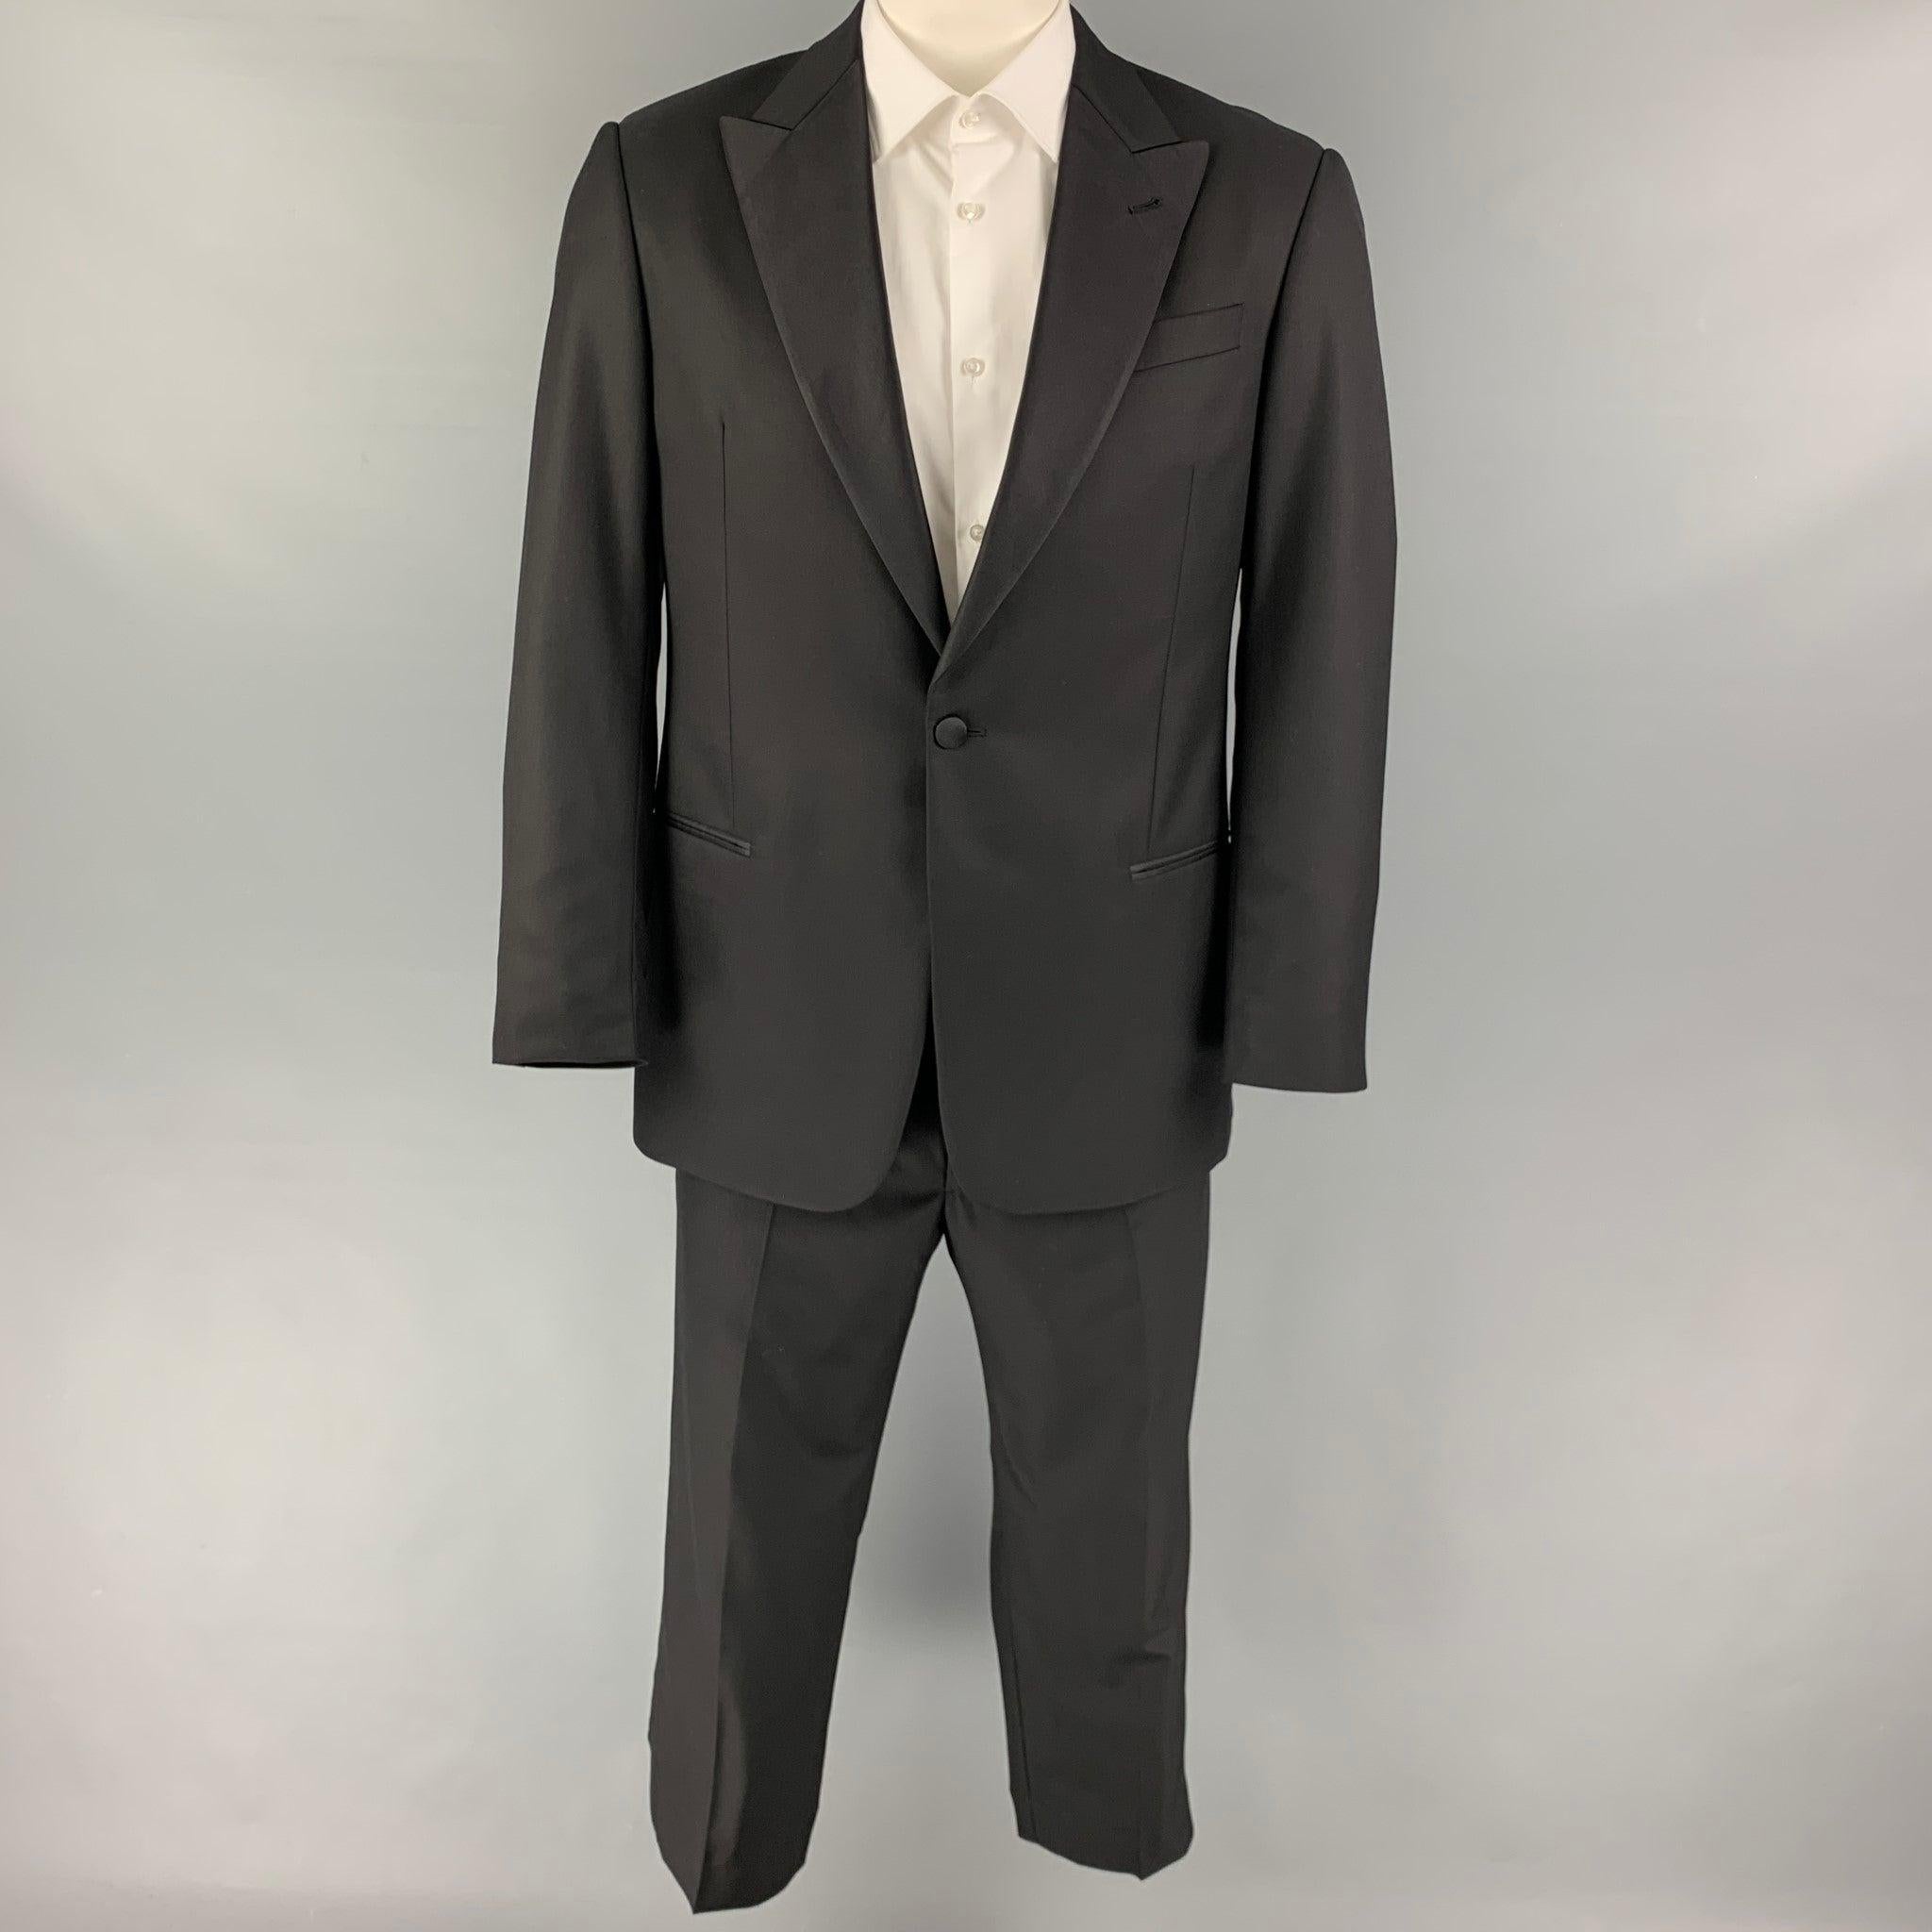 GIORGIO ARMANI
suit comes in a black wool with a full liner and includes a single breasted, single button sport coat with a peak lapel and matching flat front trousers. Excellent Pre-Owned Condition. 

Marked:   52  

Measurements: 
 